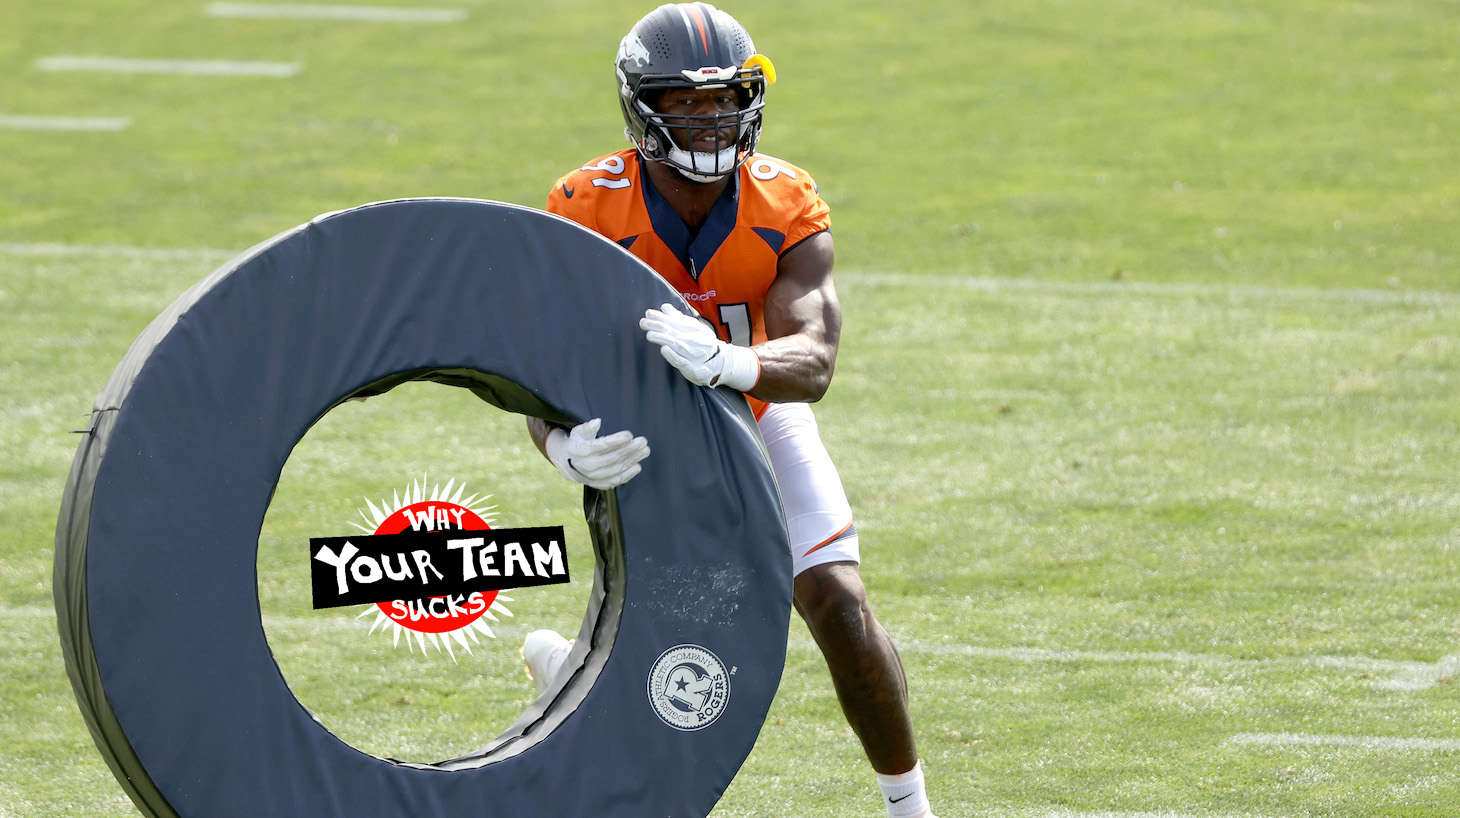 ENGLEWOOD, COLORADO - JULY 30: Andre Mintze #91 practices during the Denver Broncos Training Camp at UCHealth Training Center on July 30, 2021 in Englewood, Colorado. (Photo by Matthew Stockman/Getty Images)